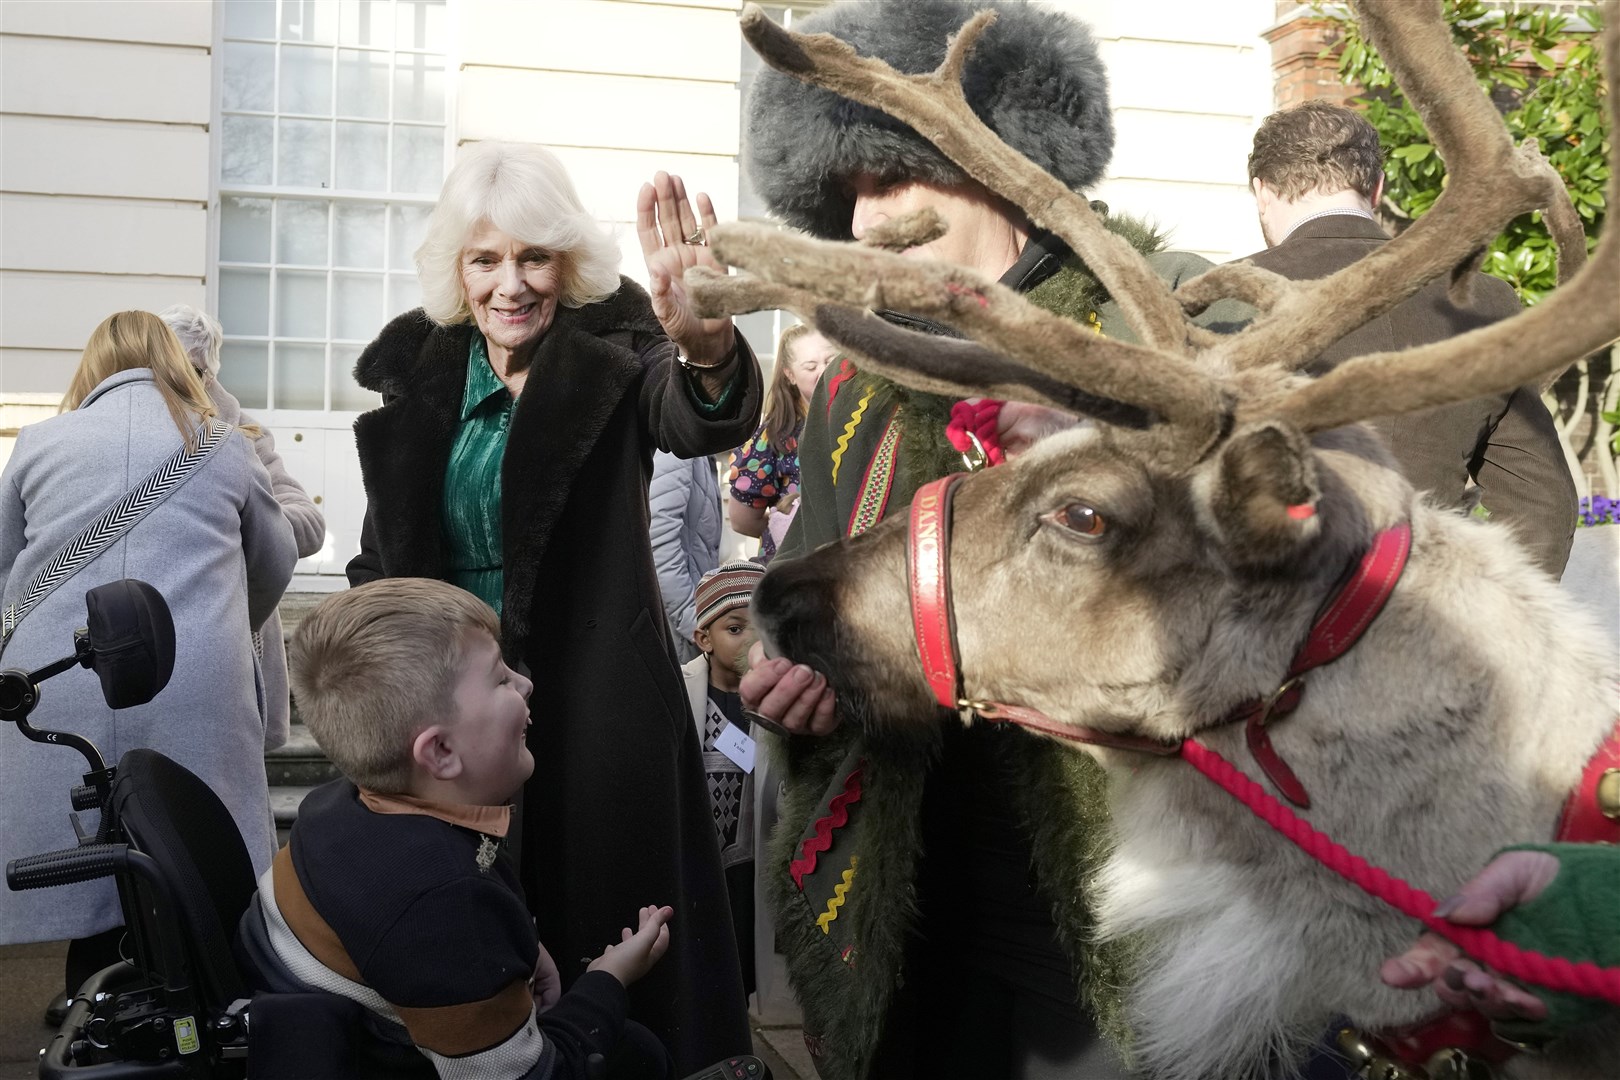 Camilla strokes a reindeer as one of her young guests watches (Kin Cheung/PA)